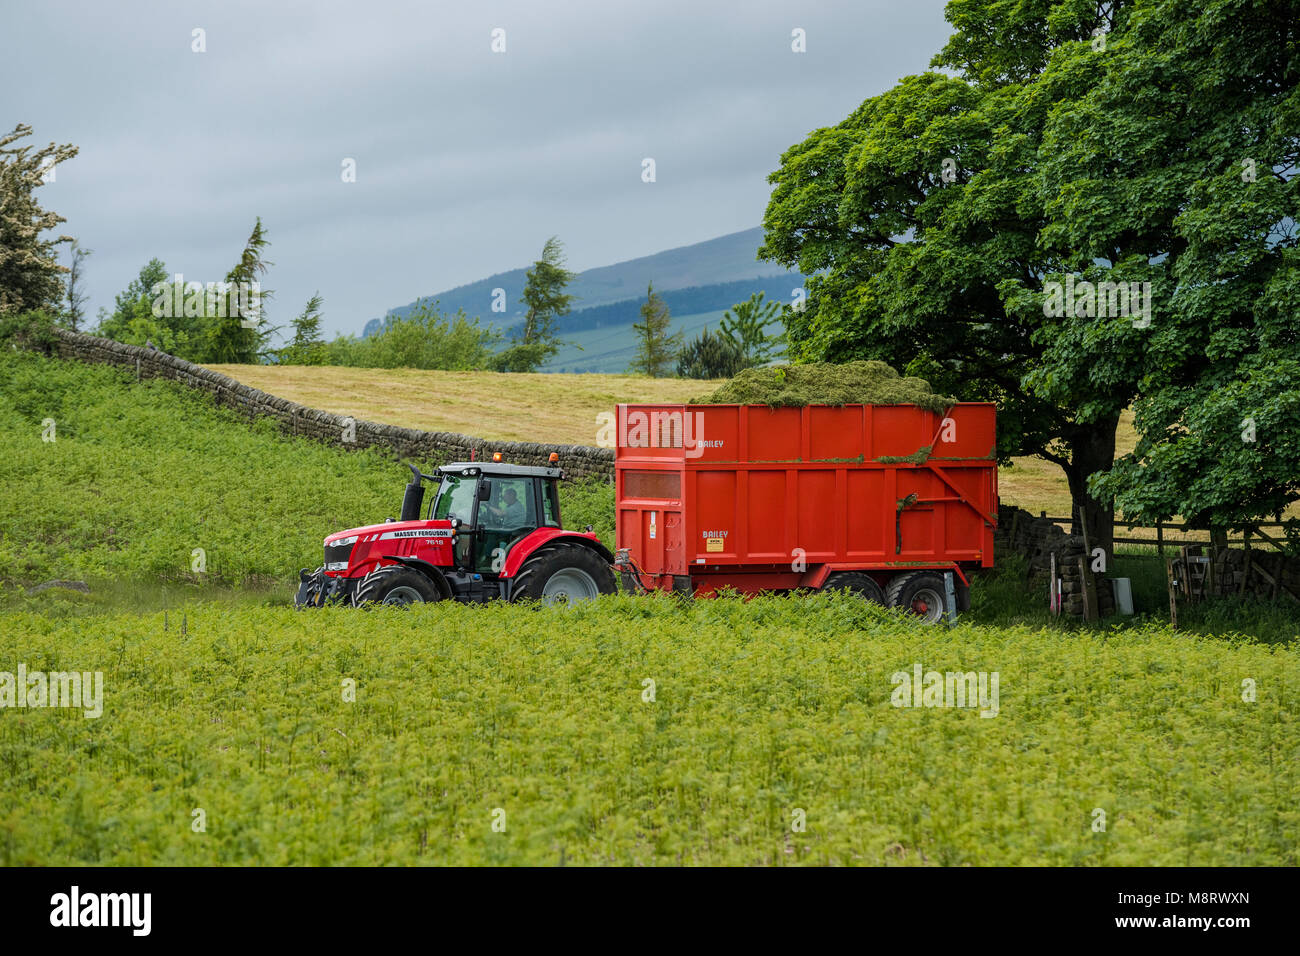 Bright red tractor pulling trailer on farm track in scenic countryside. Wagon is fully loaded with grass for silage - West Yorkshire, England, UK. Stock Photo